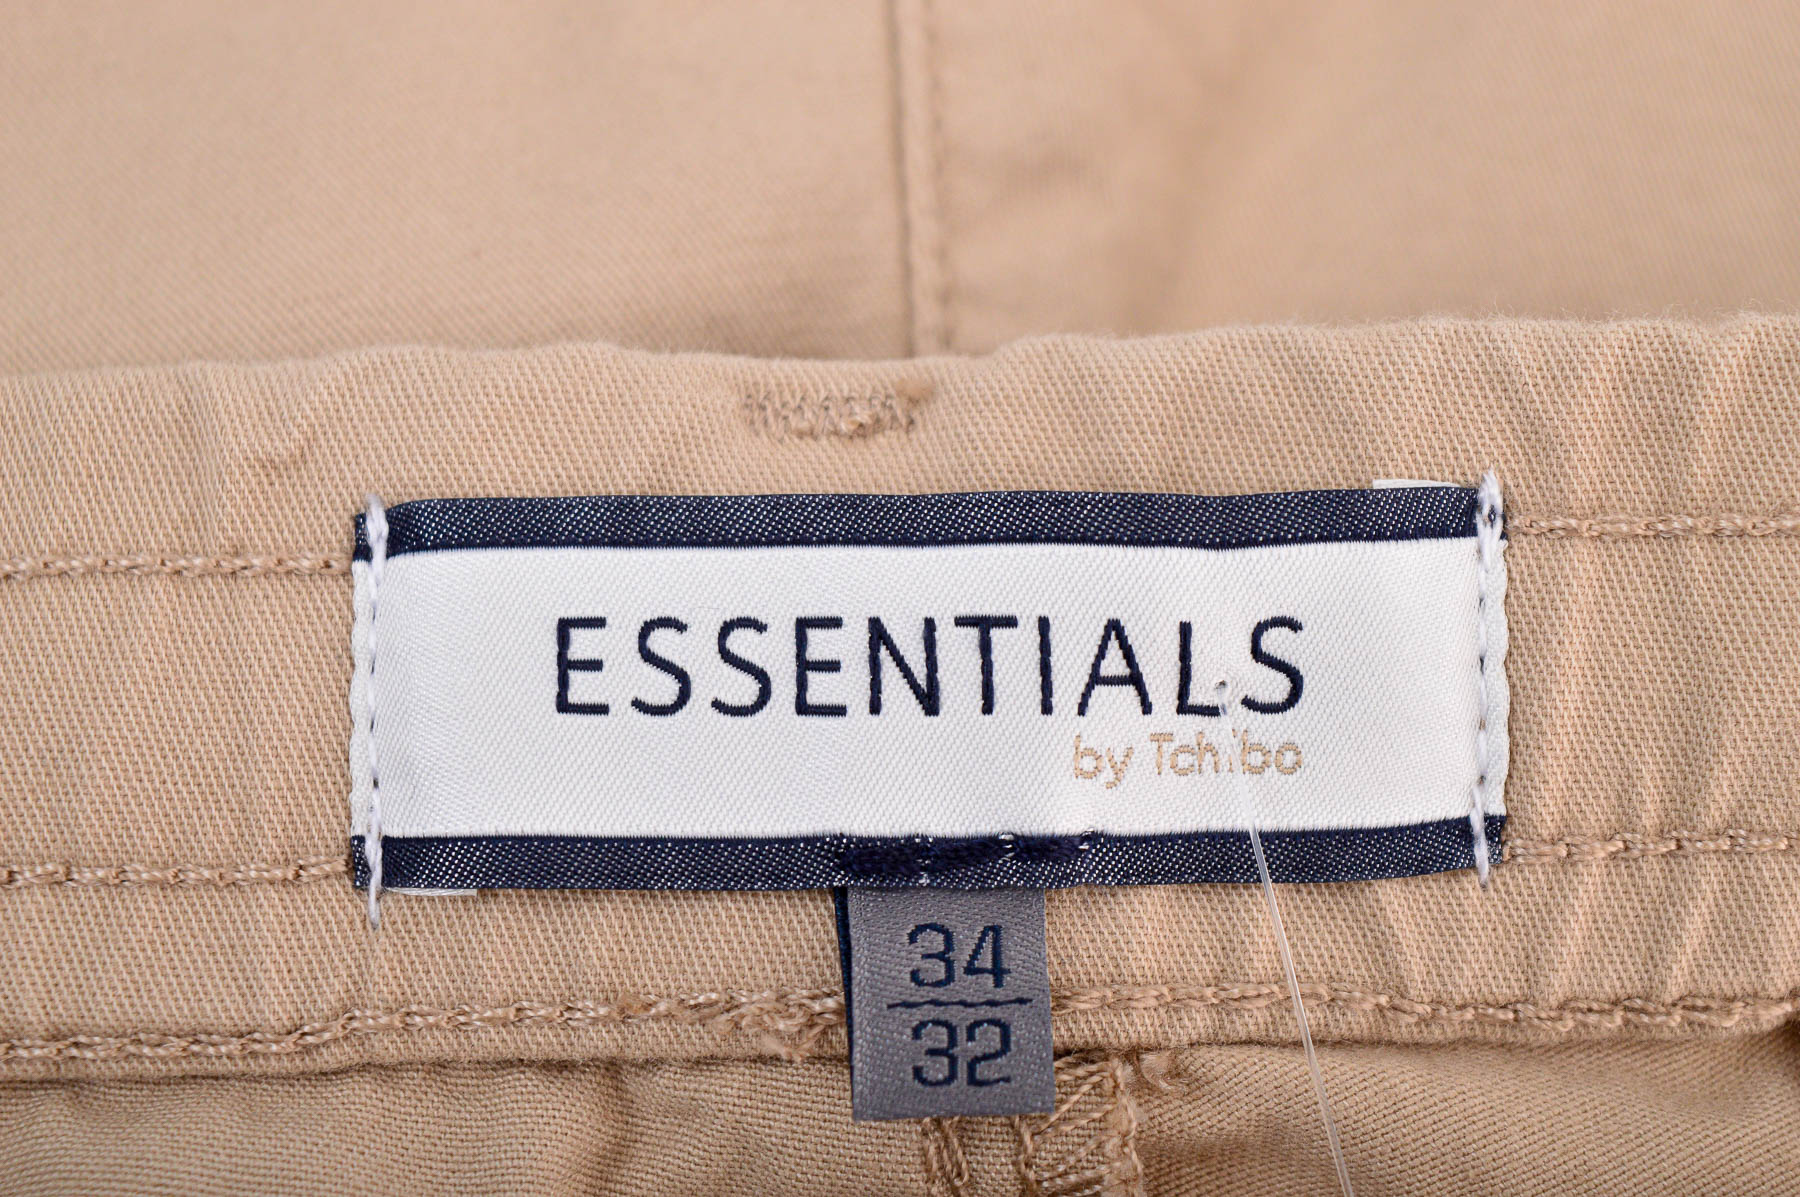 Men's trousers - Essentials by Tchibo - 2